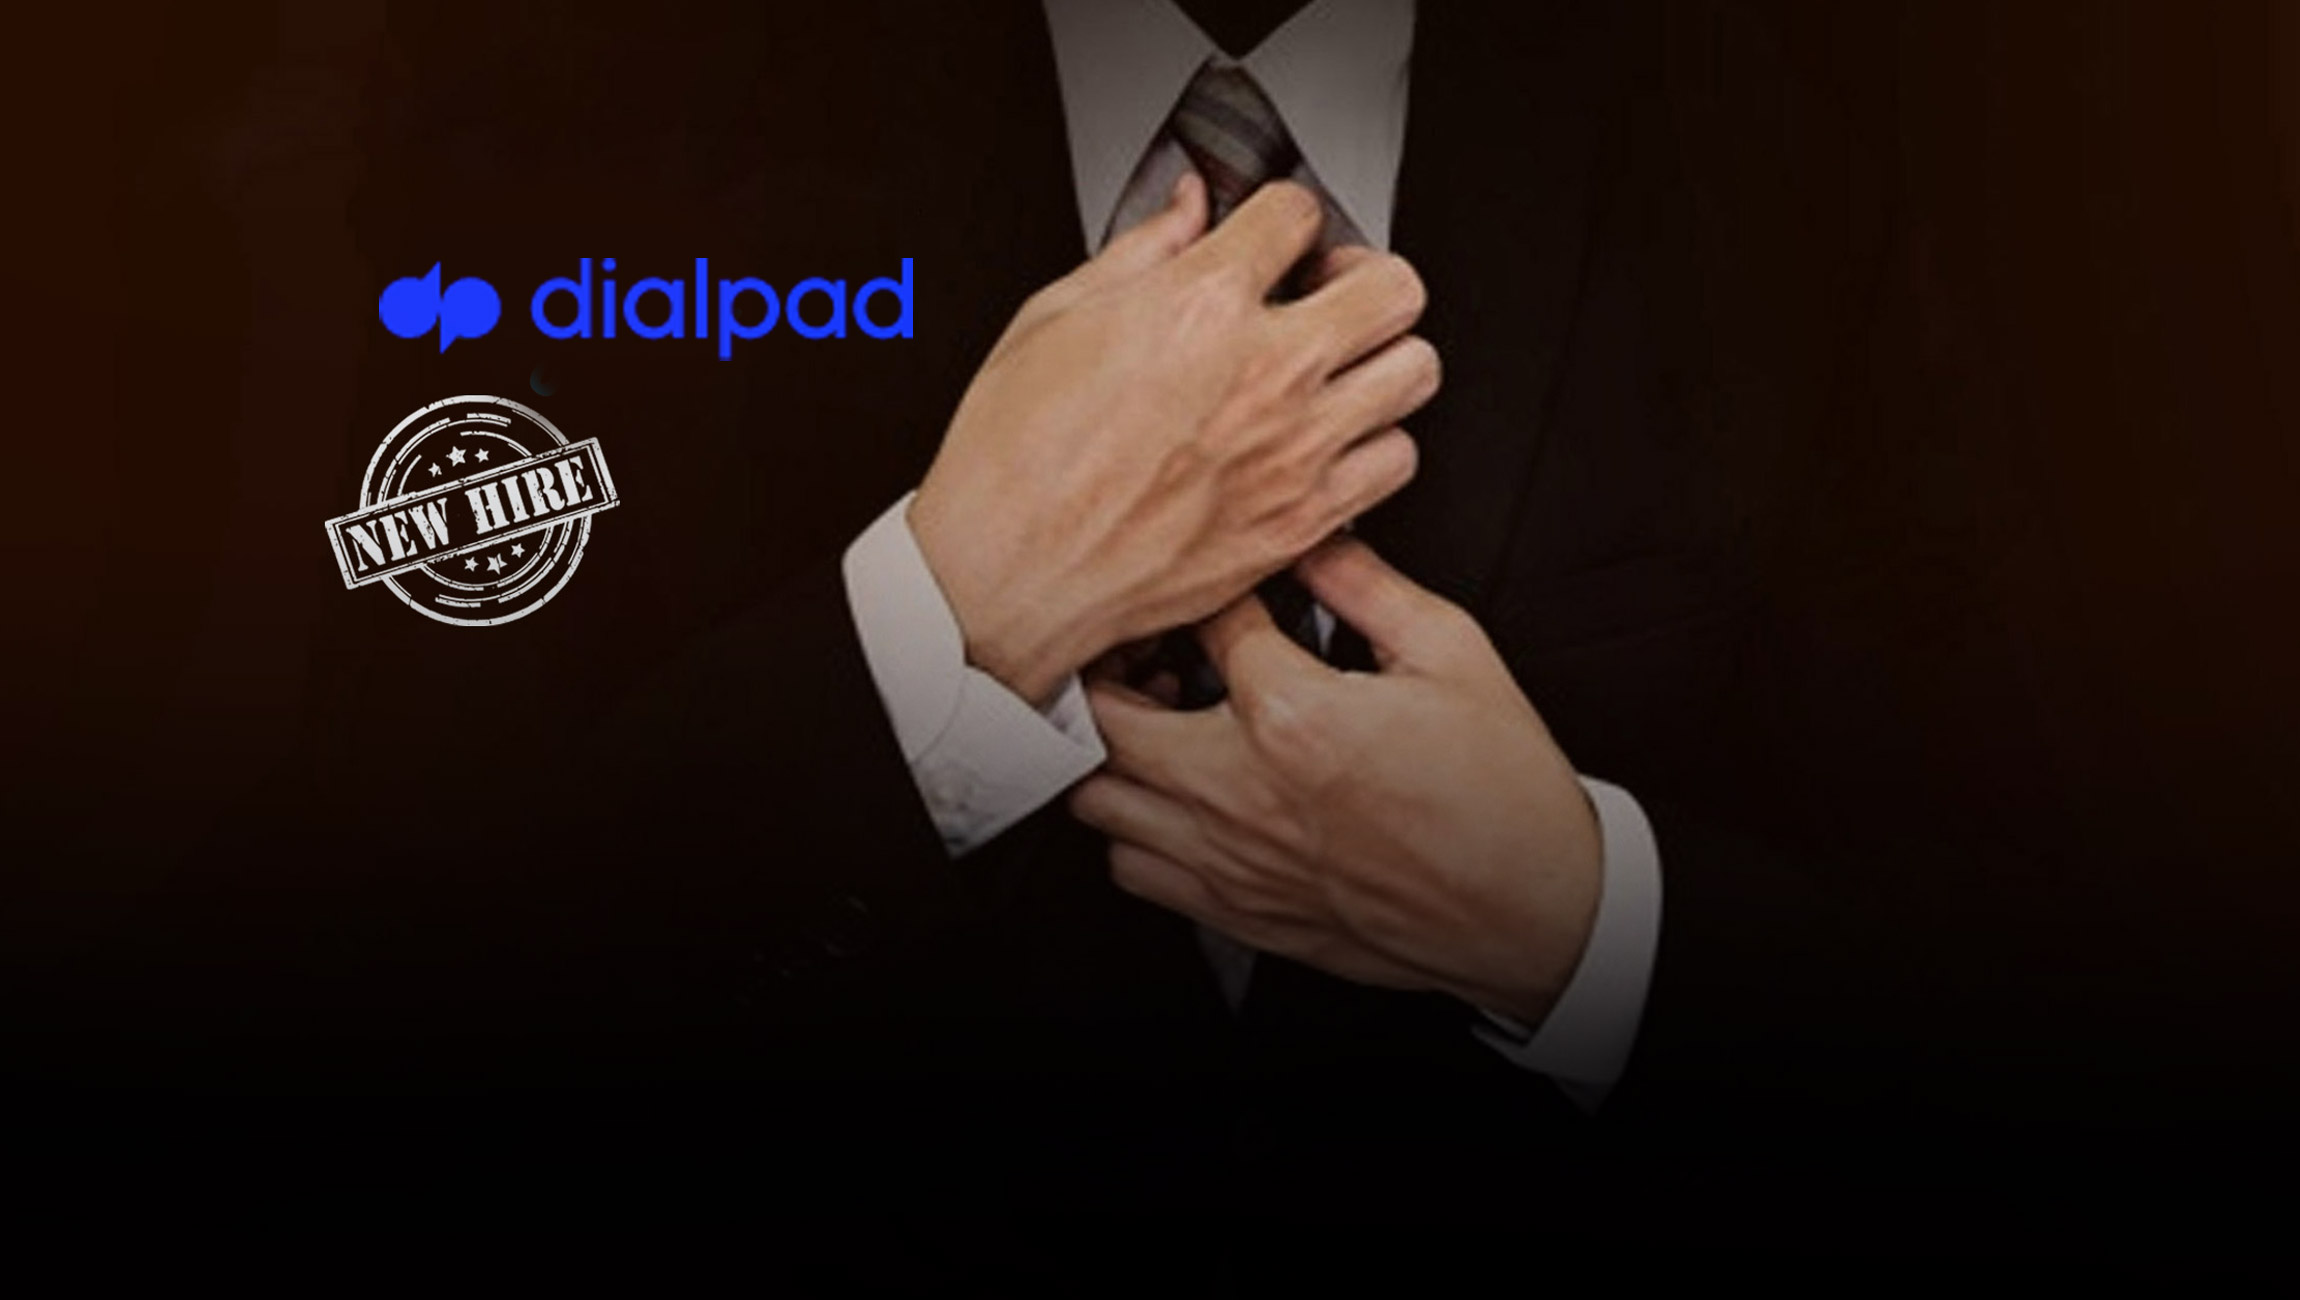 Dialpad Appoints Industry Veterans Jim Nystrom and Kent Venook to Key Sales Leadership Roles